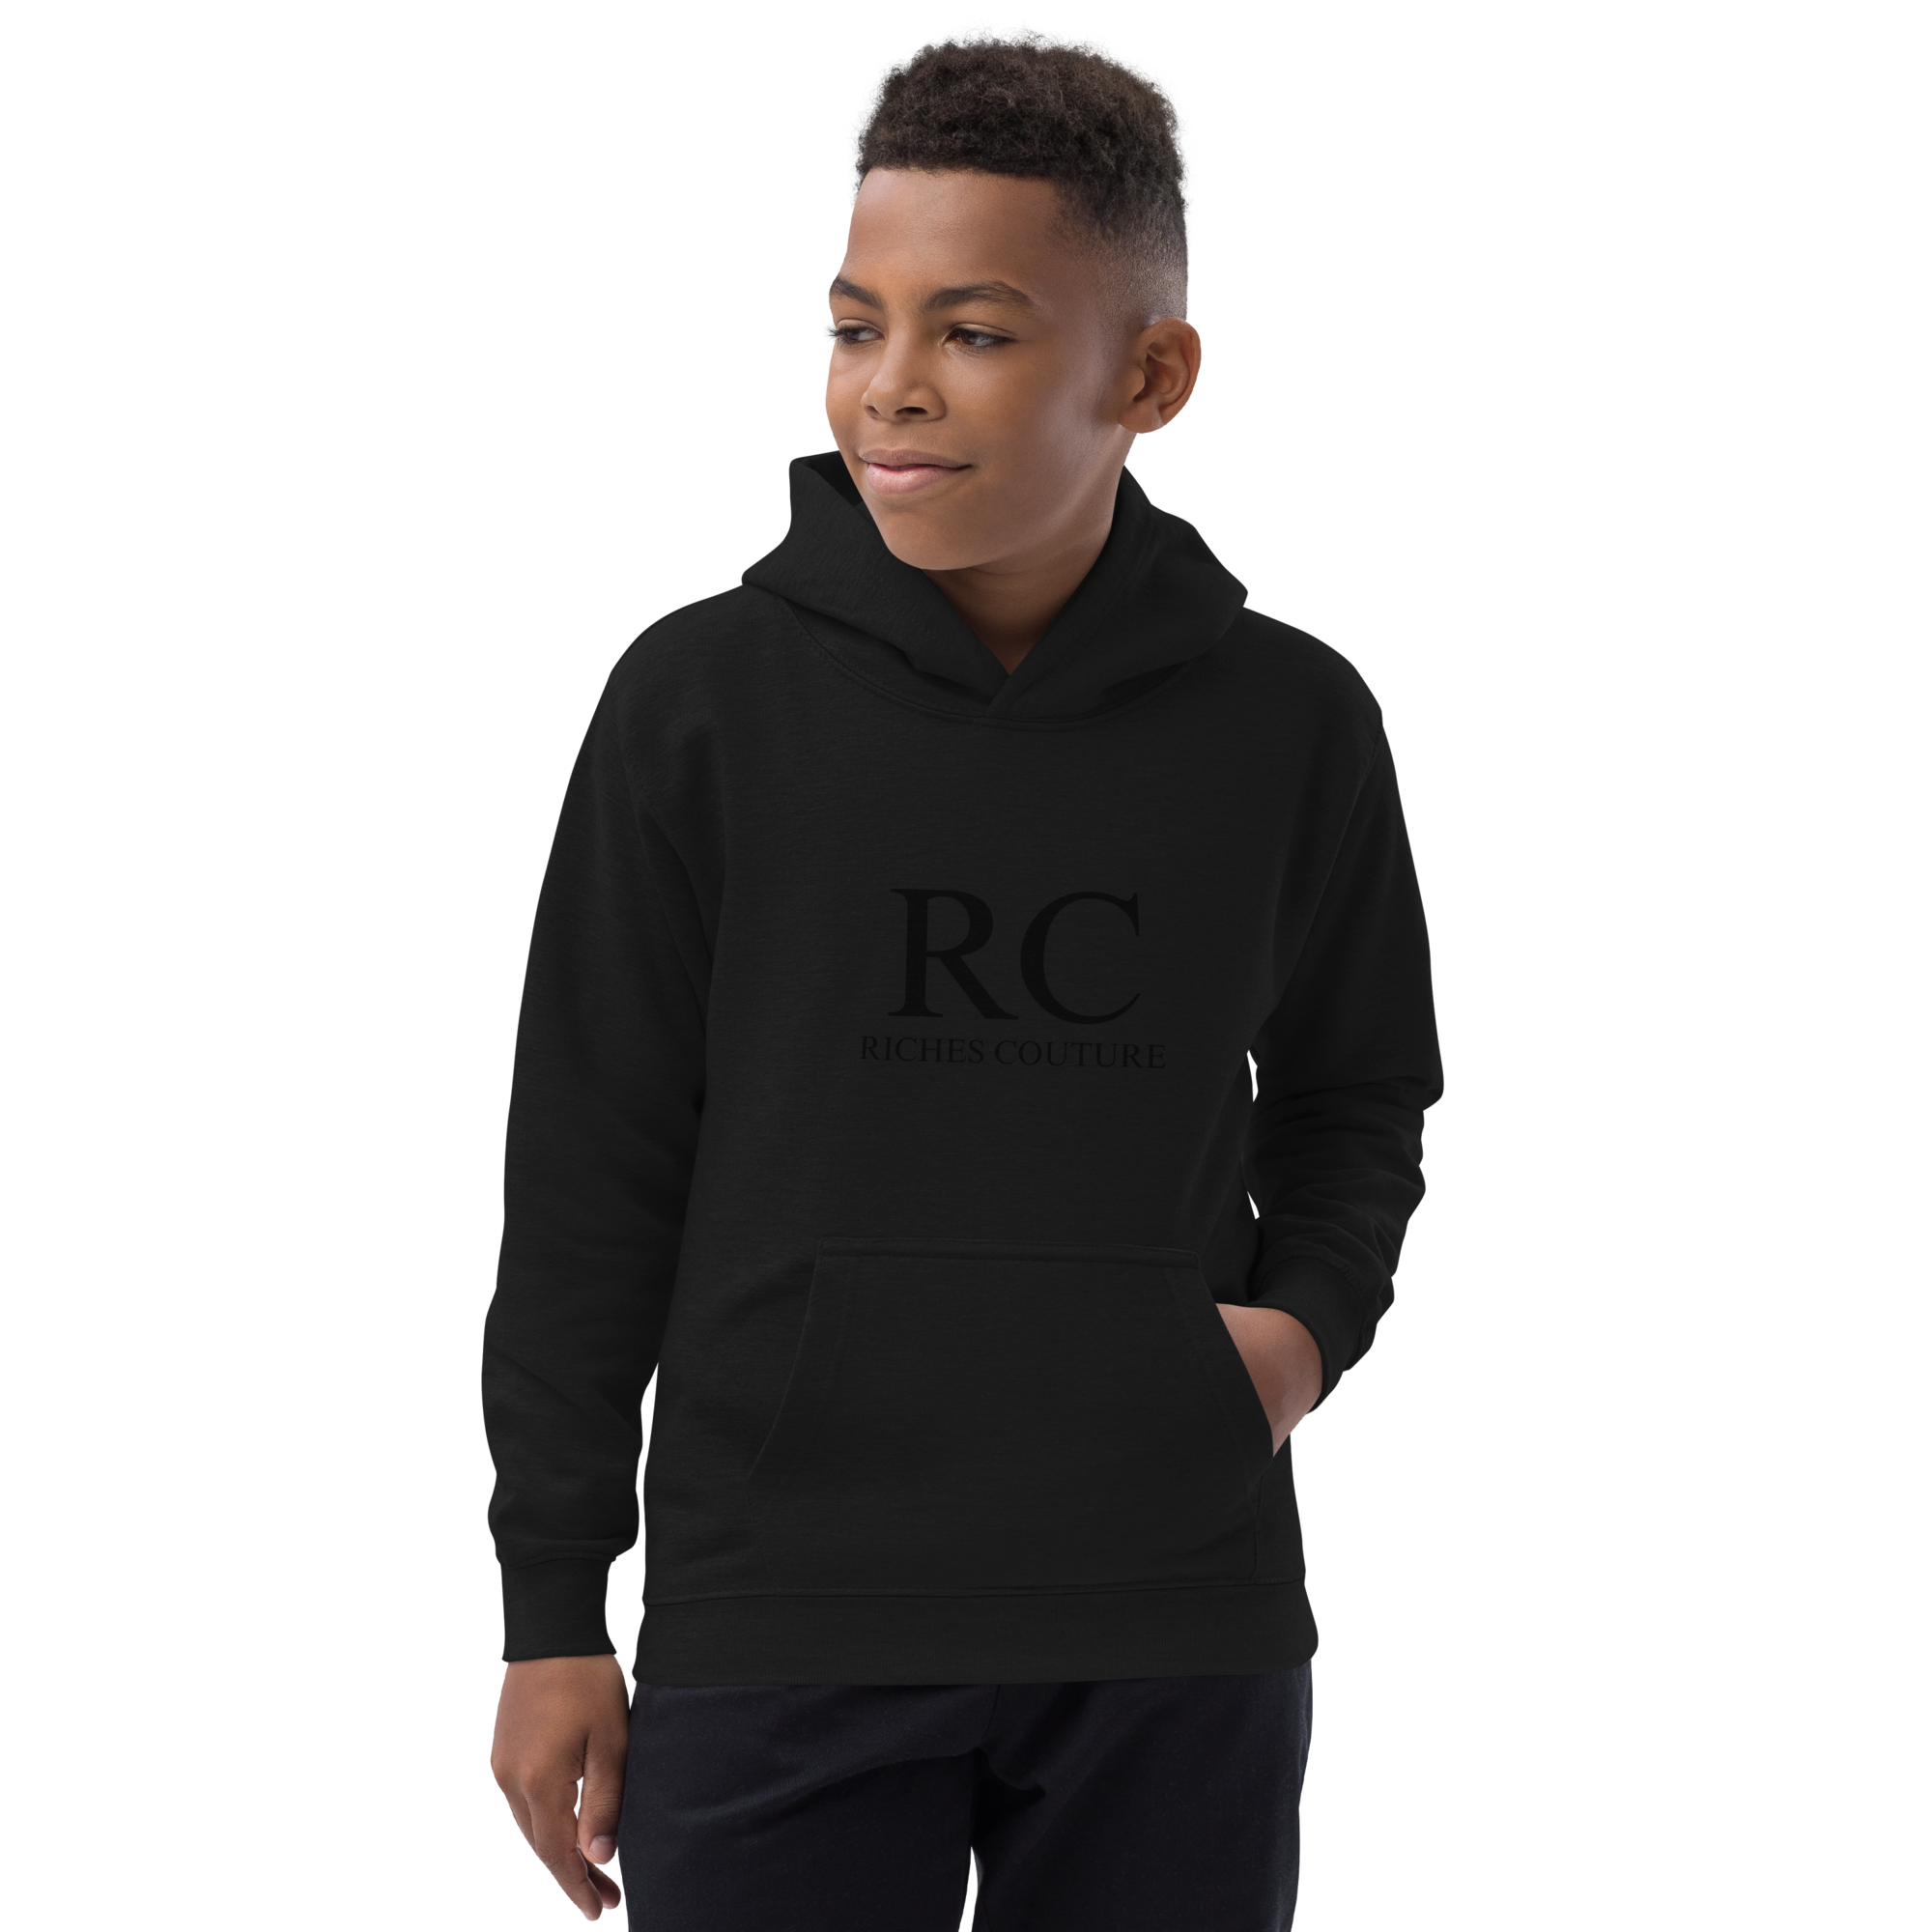  Riches Couture Boys  Comfort kids’ hoodie in black.